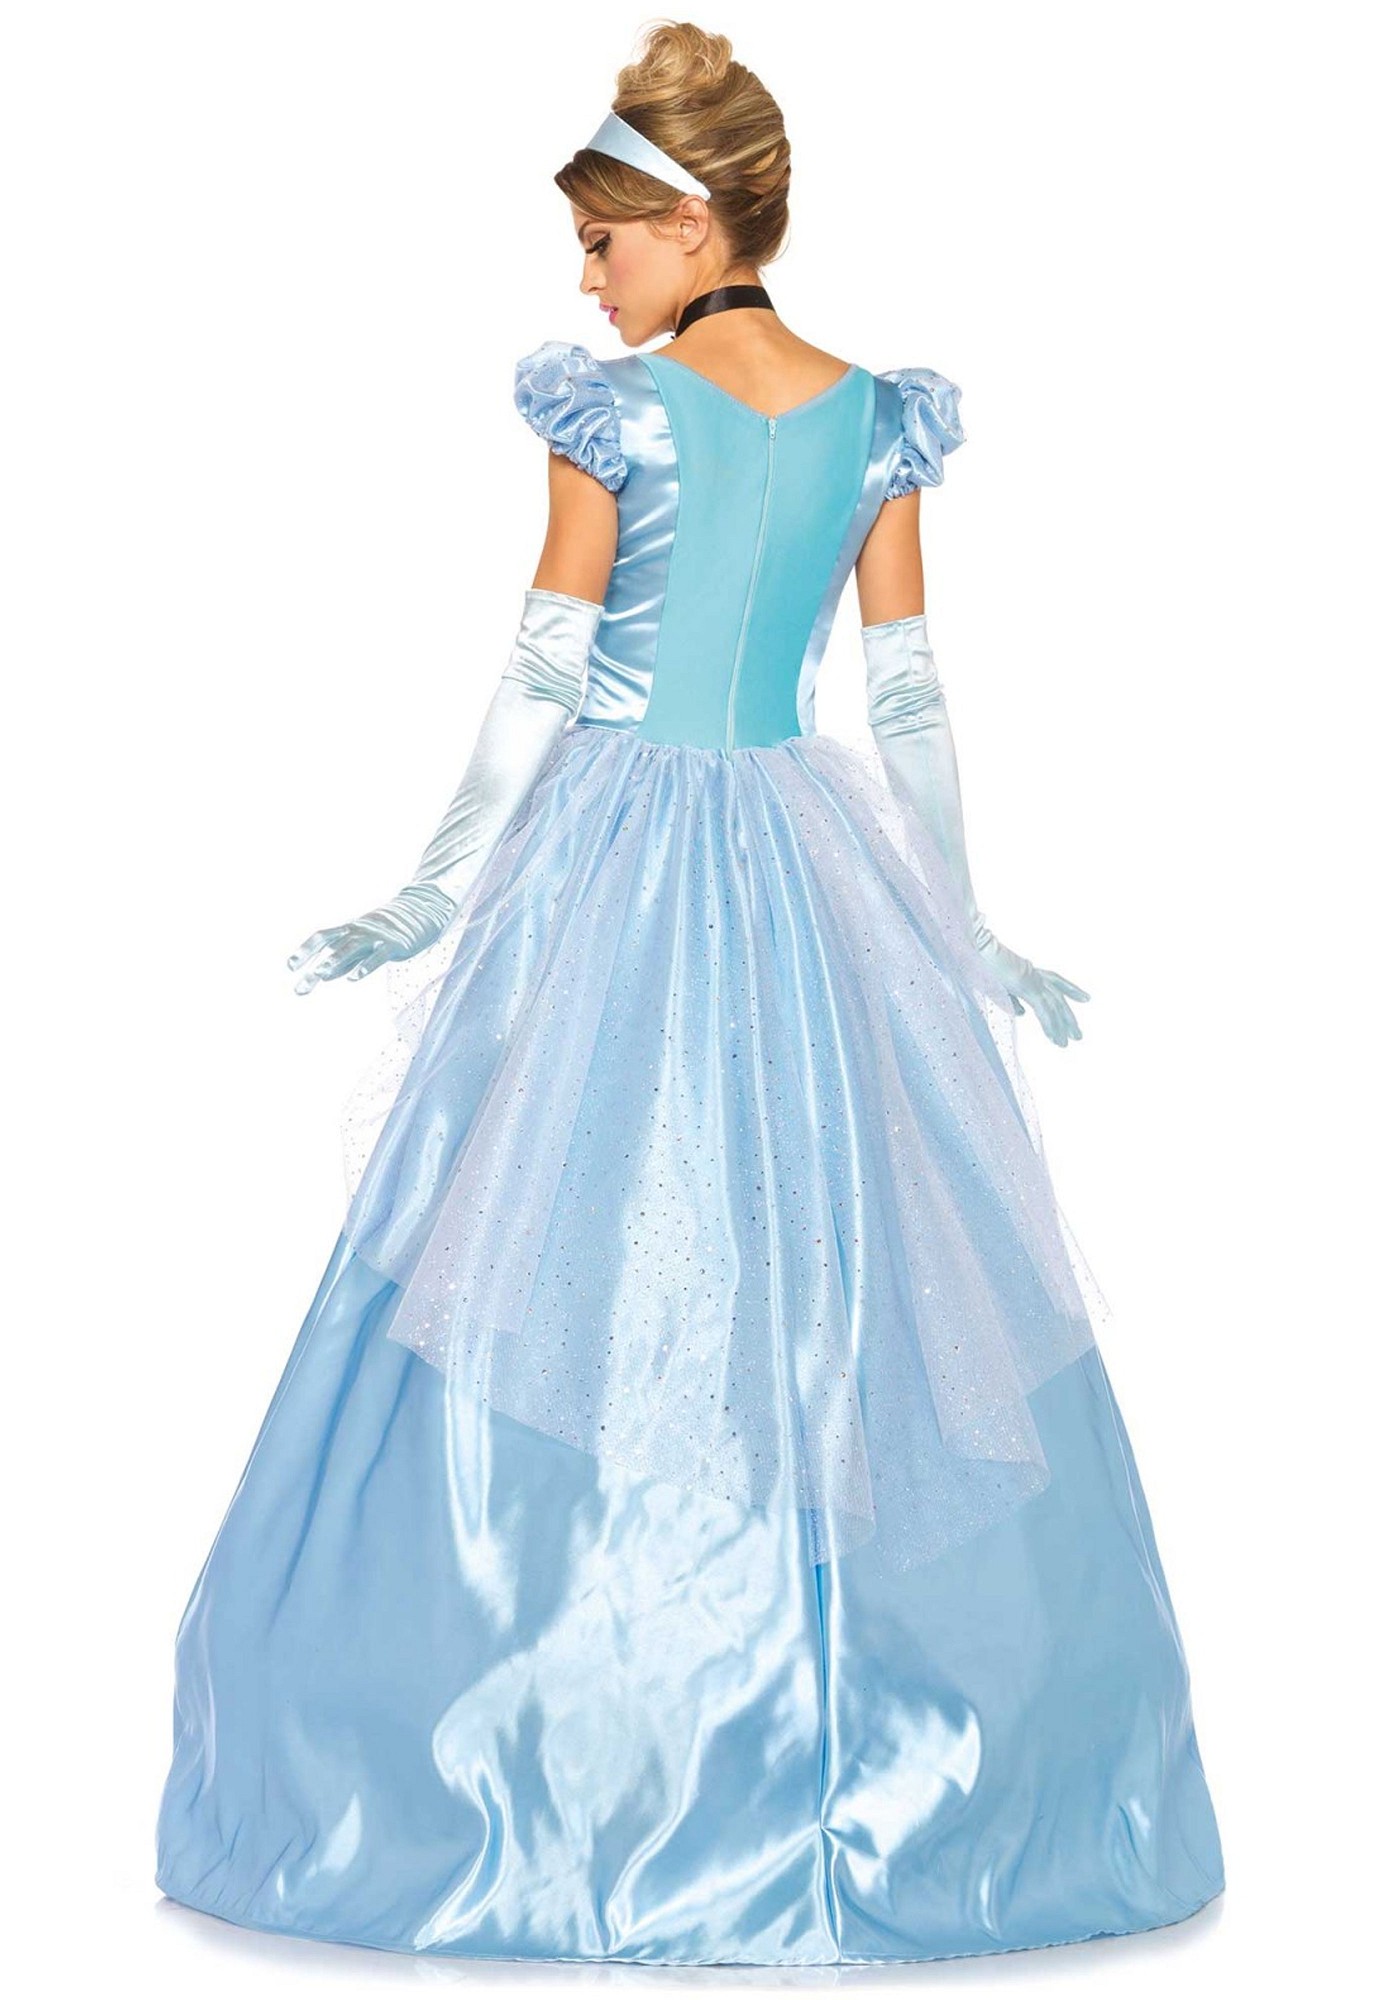 Classic Cinderella ball gown